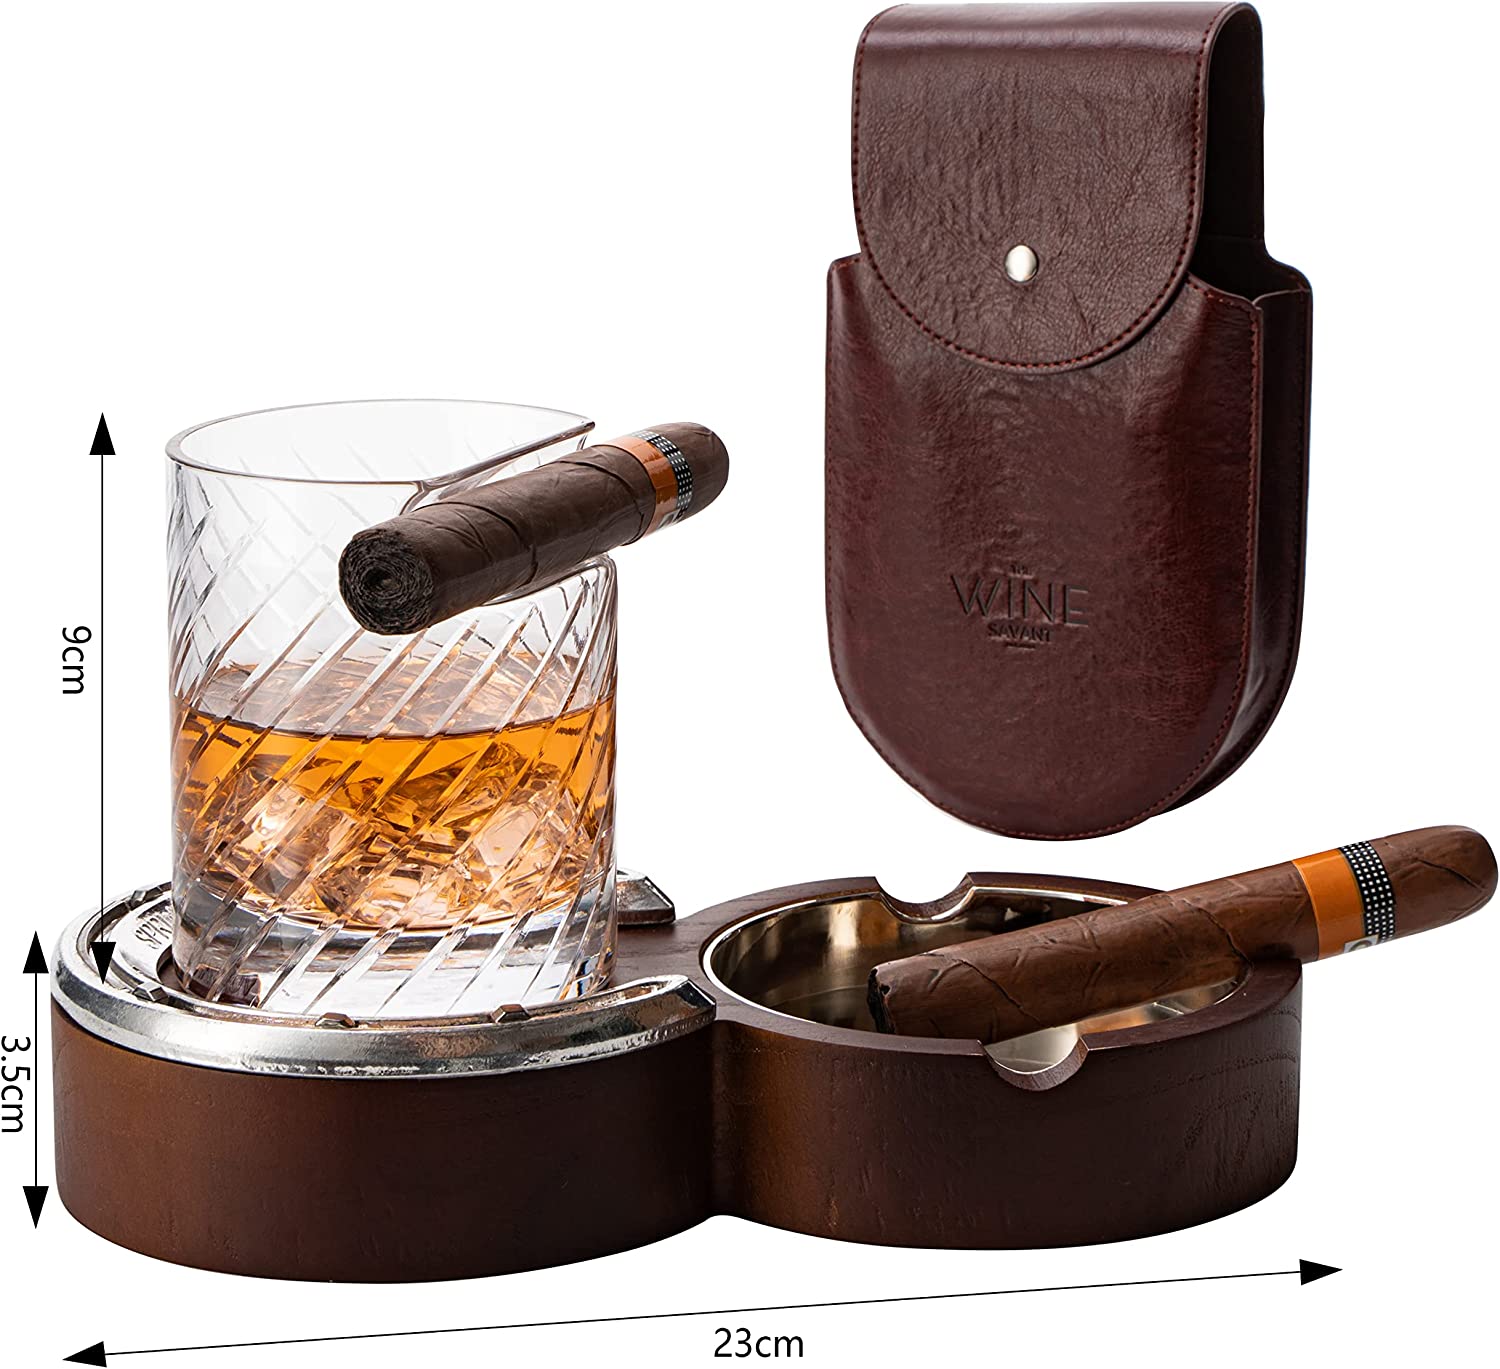 The Wine Savant Luxurious Cigar Glass - In A Leather Horseshoe Storage Case Whiskey Glassware with Cigar Holder - 10oz Cigar Holder Whiskey, Ash Tray - Dad, Men Home Office, Leather Gifts-6